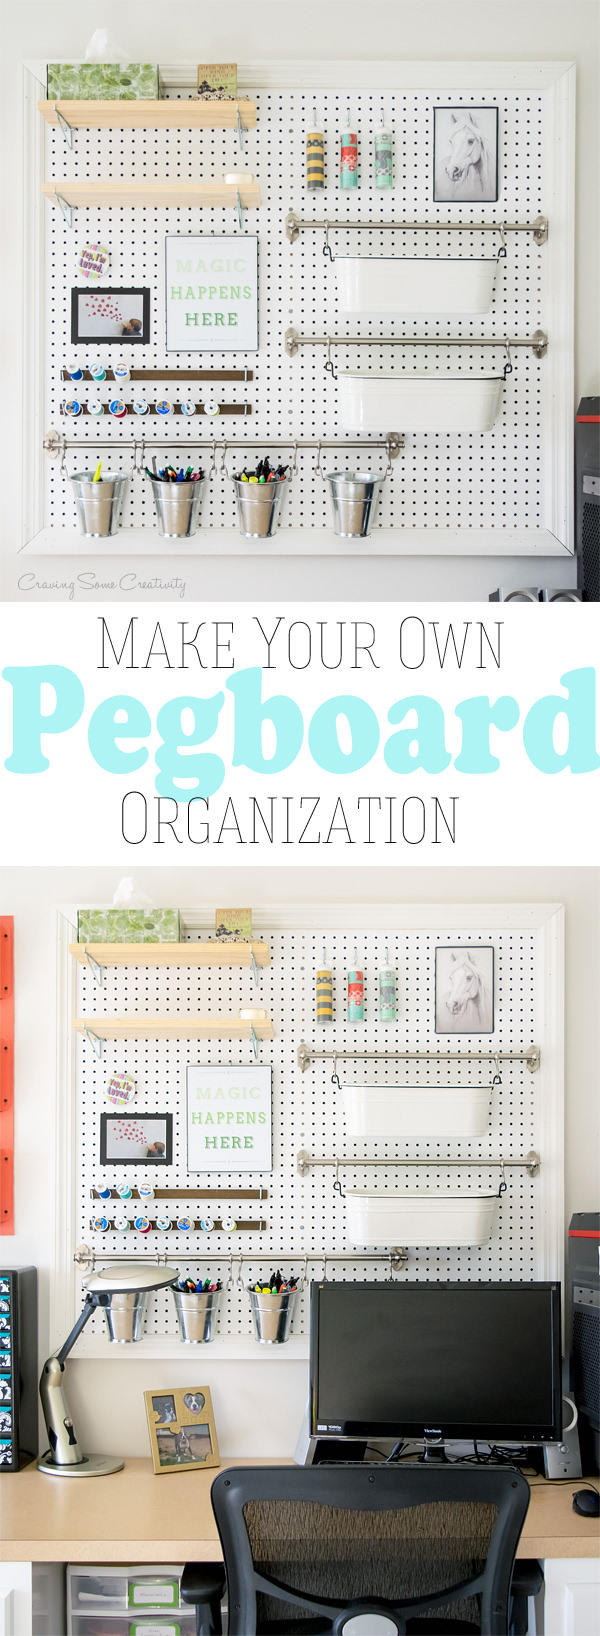 It's really an interesting idea to have a home office and a home office should have a PEGBOARD ORGANIZER. Learn how to build it for your home office in this post.